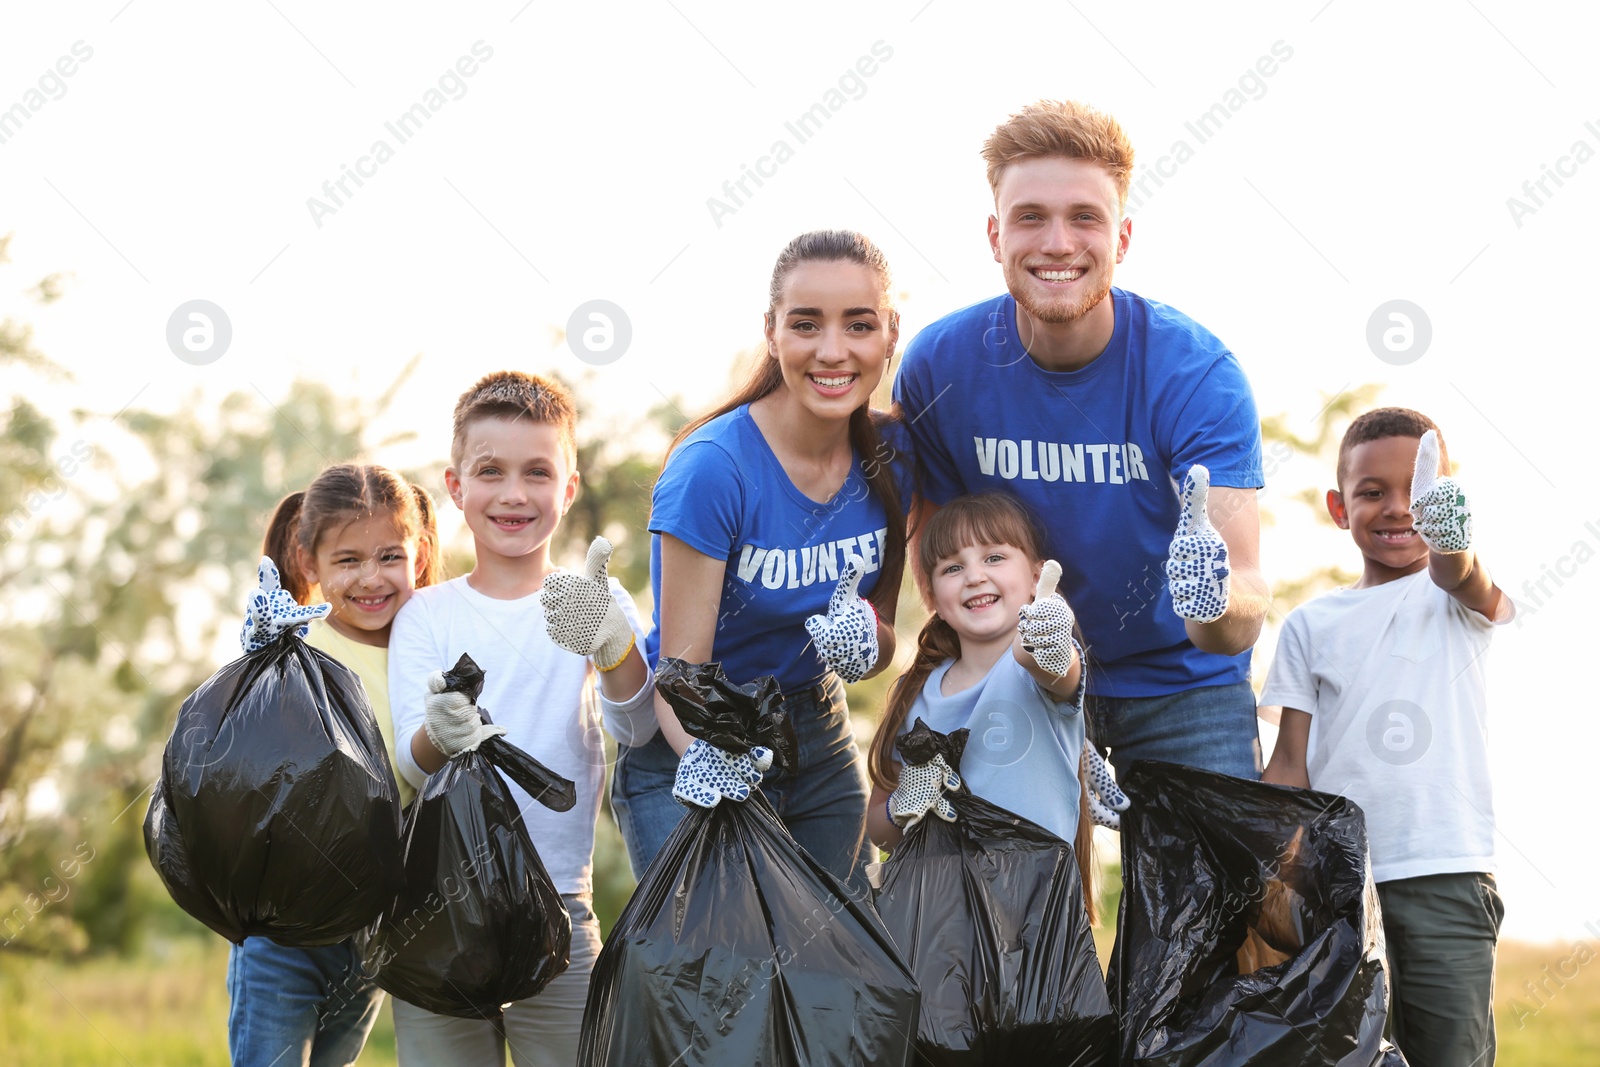 Photo of Volunteers and kids with bags of trash in park